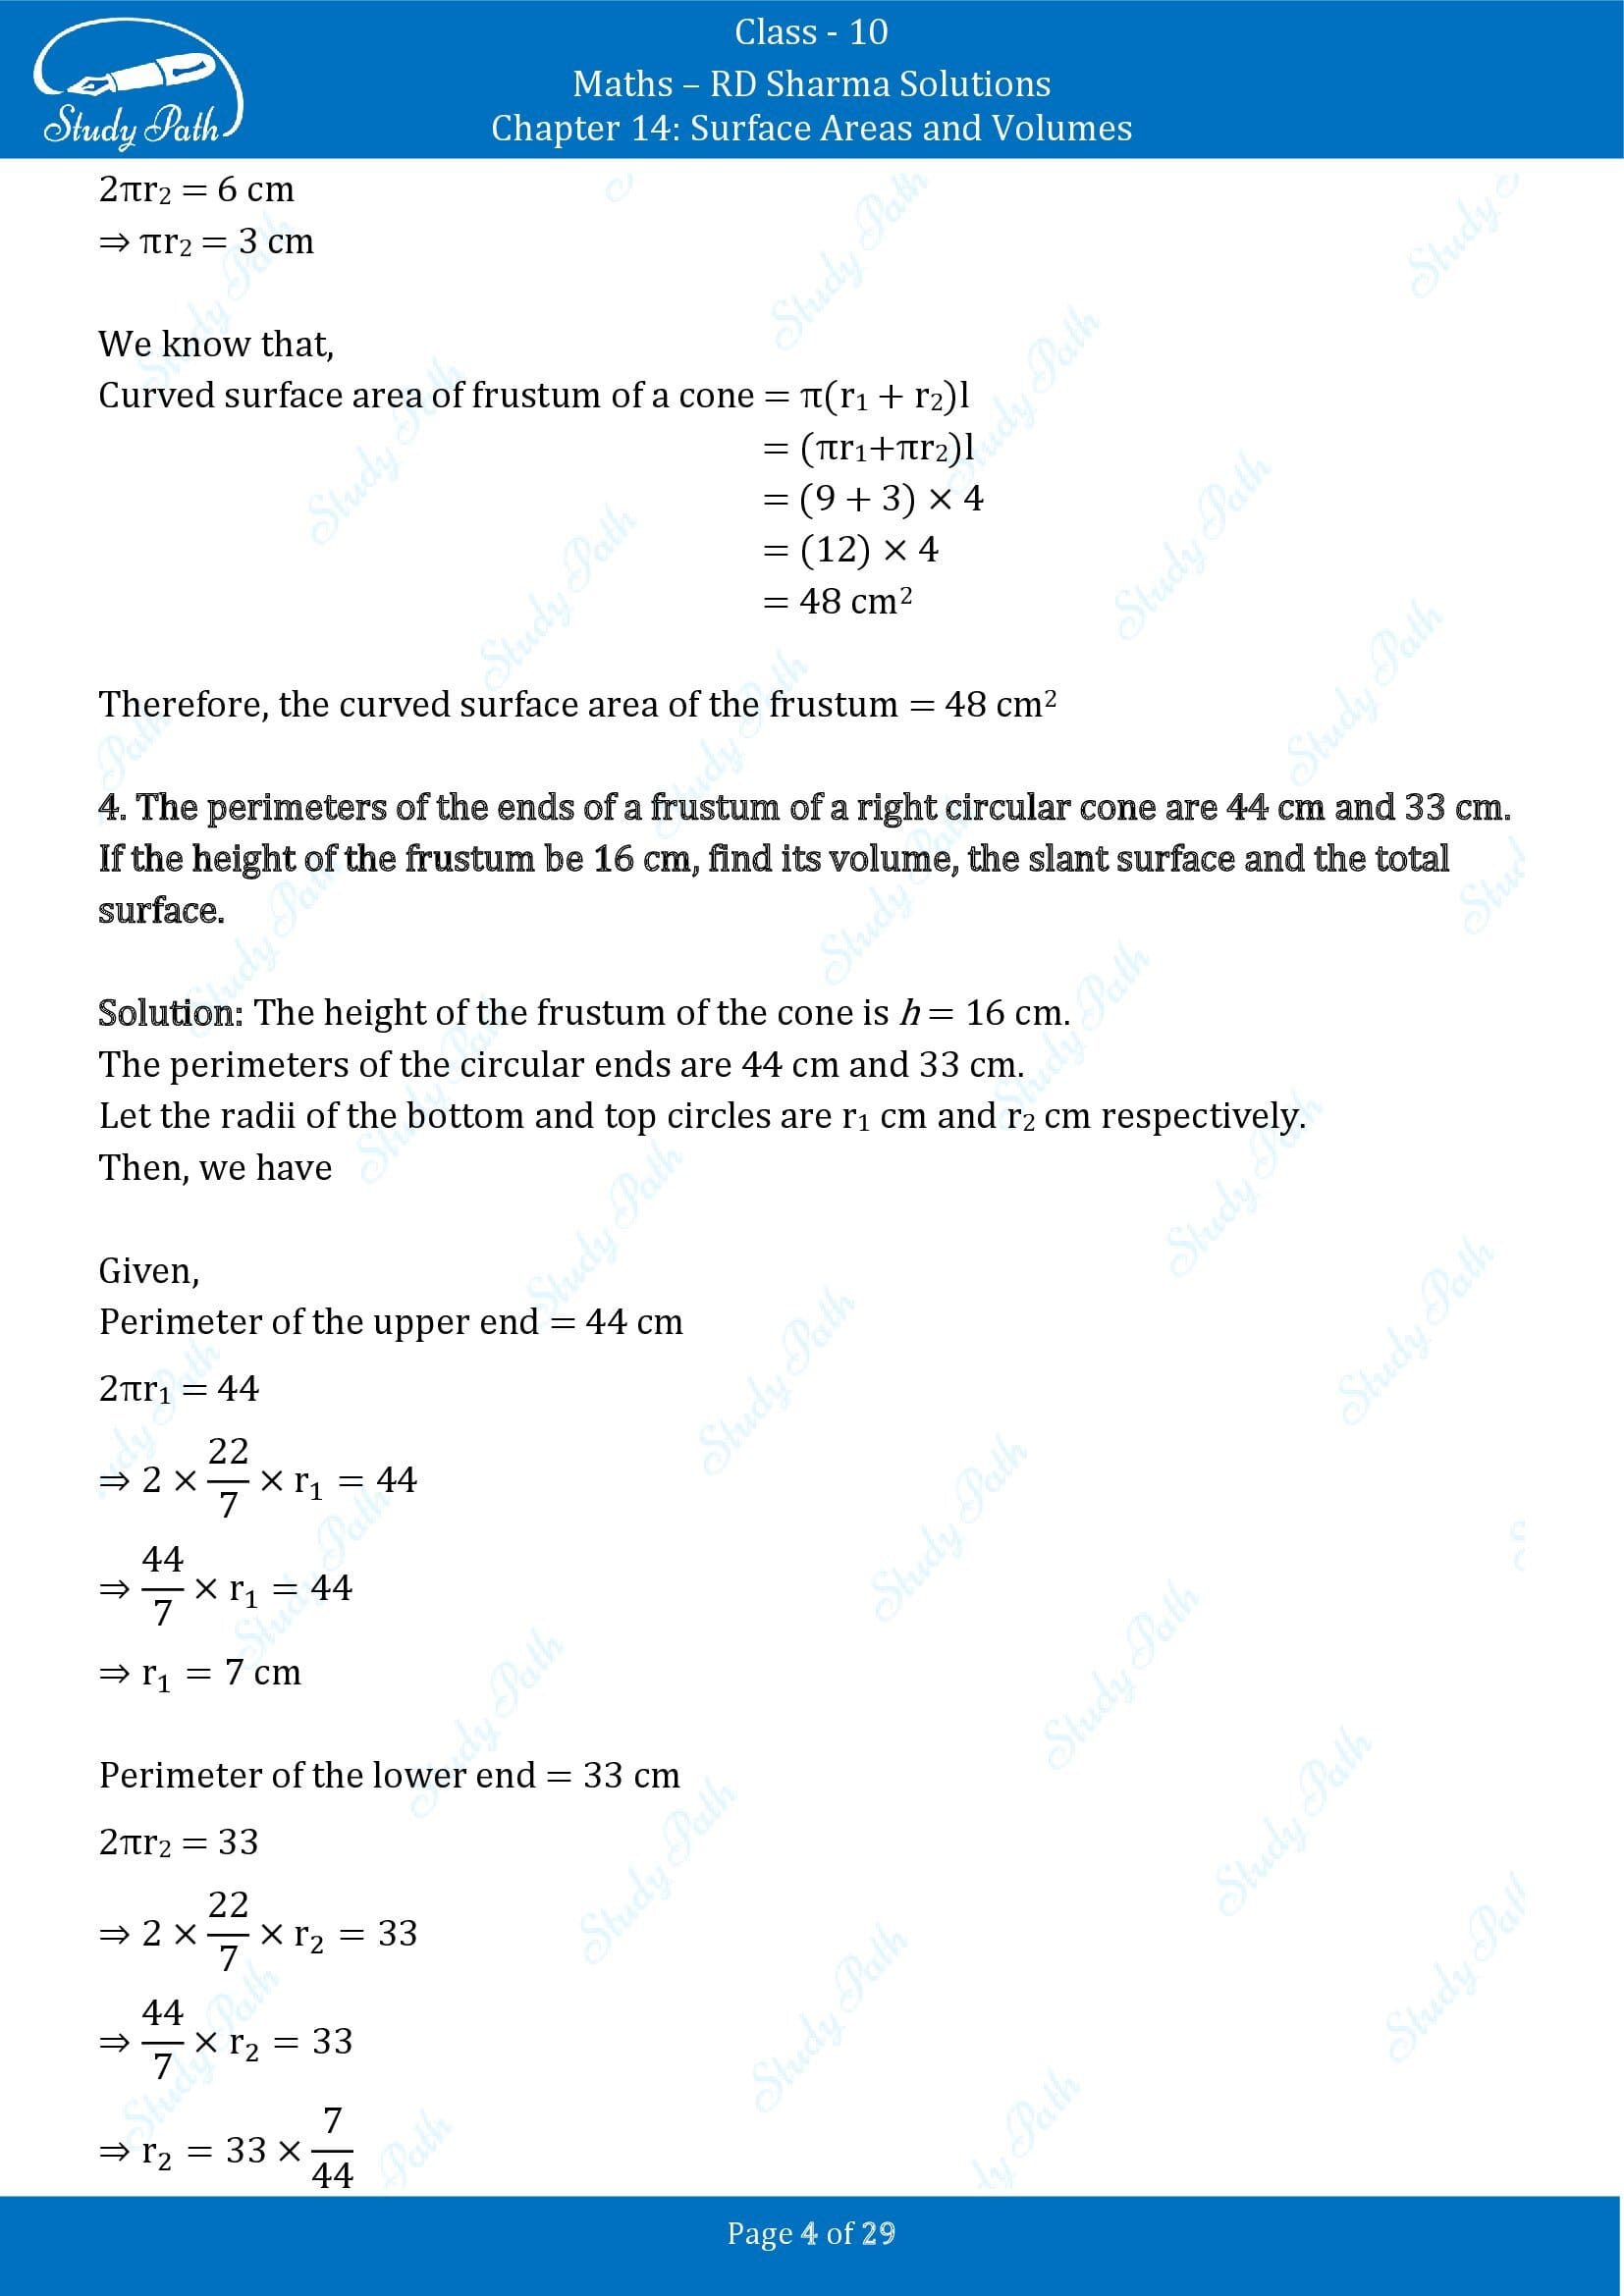 RD Sharma Solutions Class 10 Chapter 14 Surface Areas and Volumes Exercise 14.3 00004